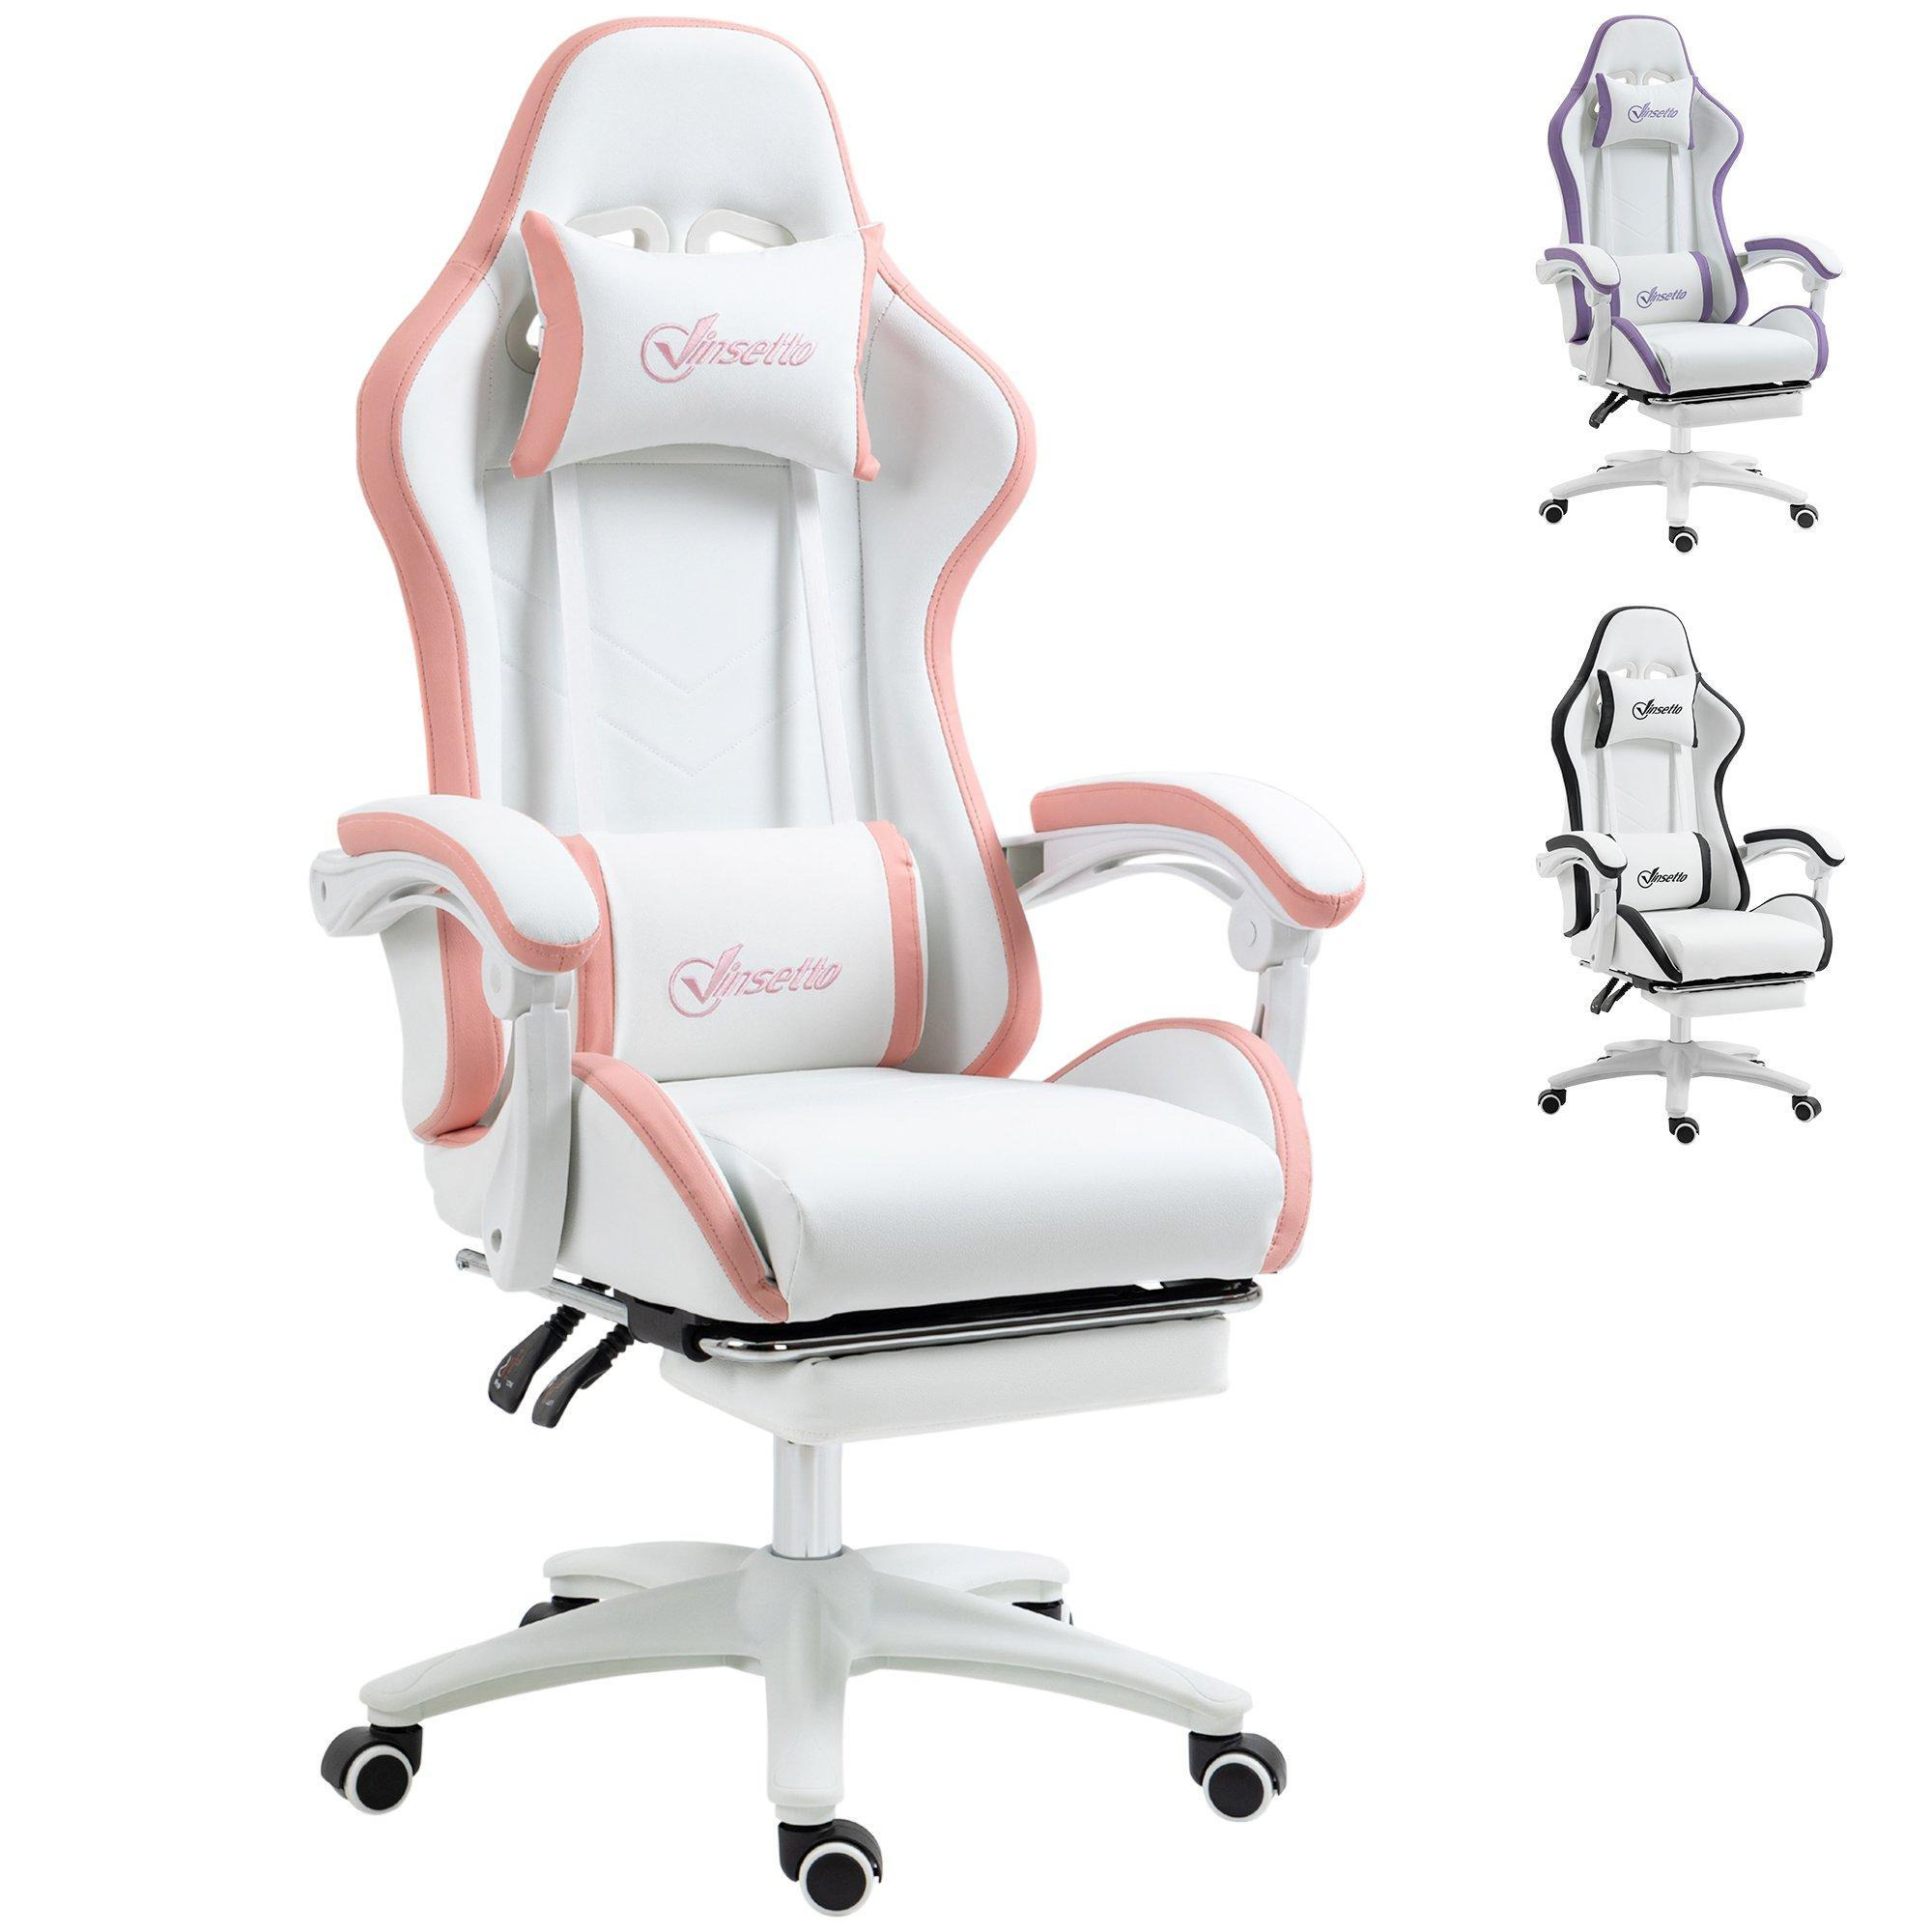 Racing Gaming Chair Reclining PU Leather Computer Chair - image 1